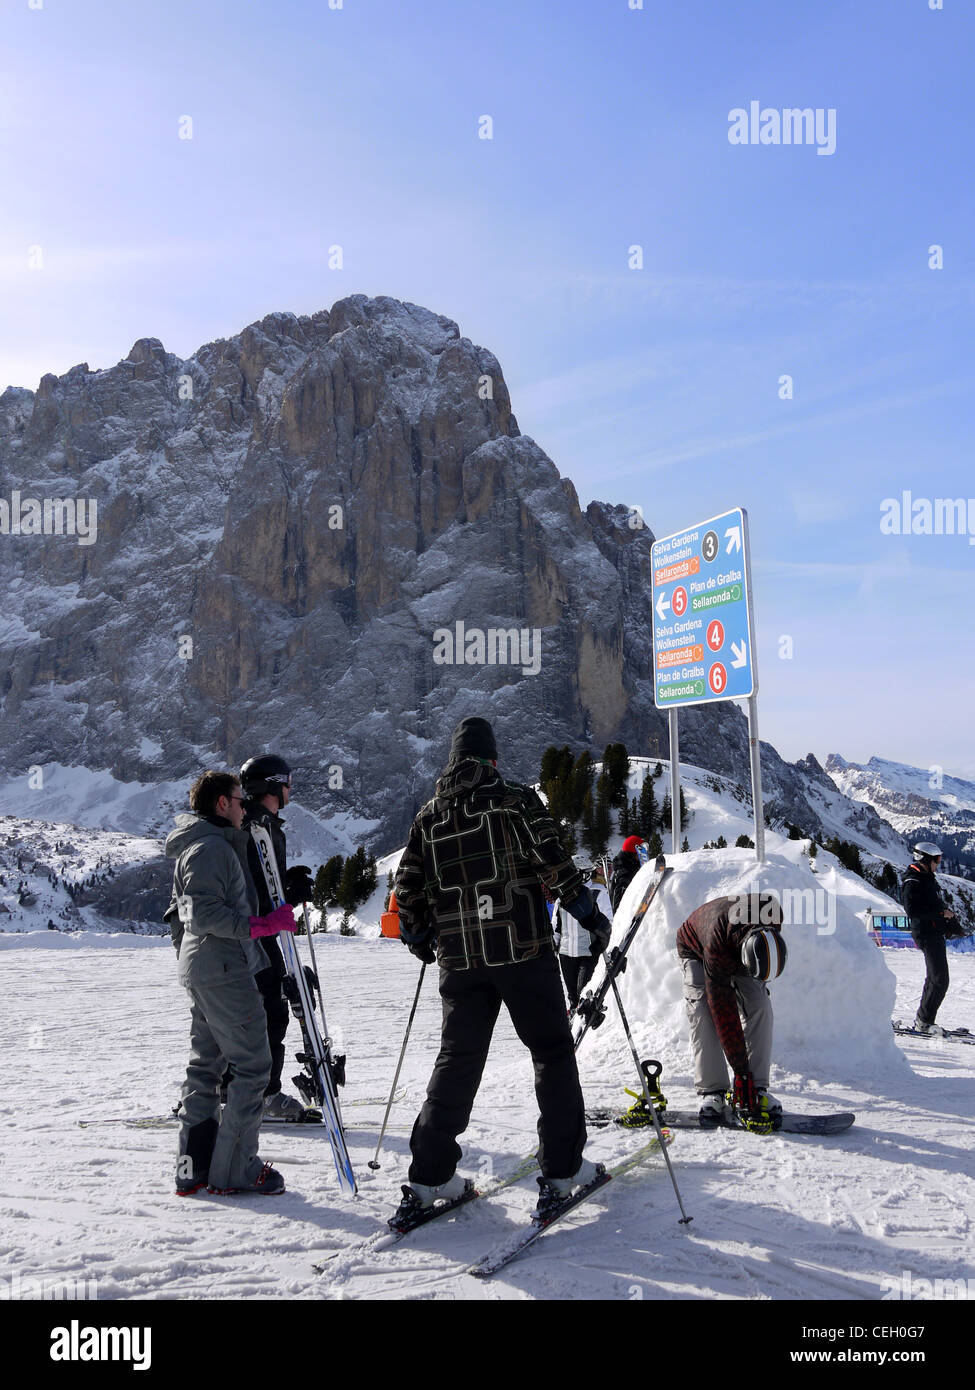 Skiers and snowboarders looking at the piste notice board on the Sellaronda ski circuit in Italy Stock Photo